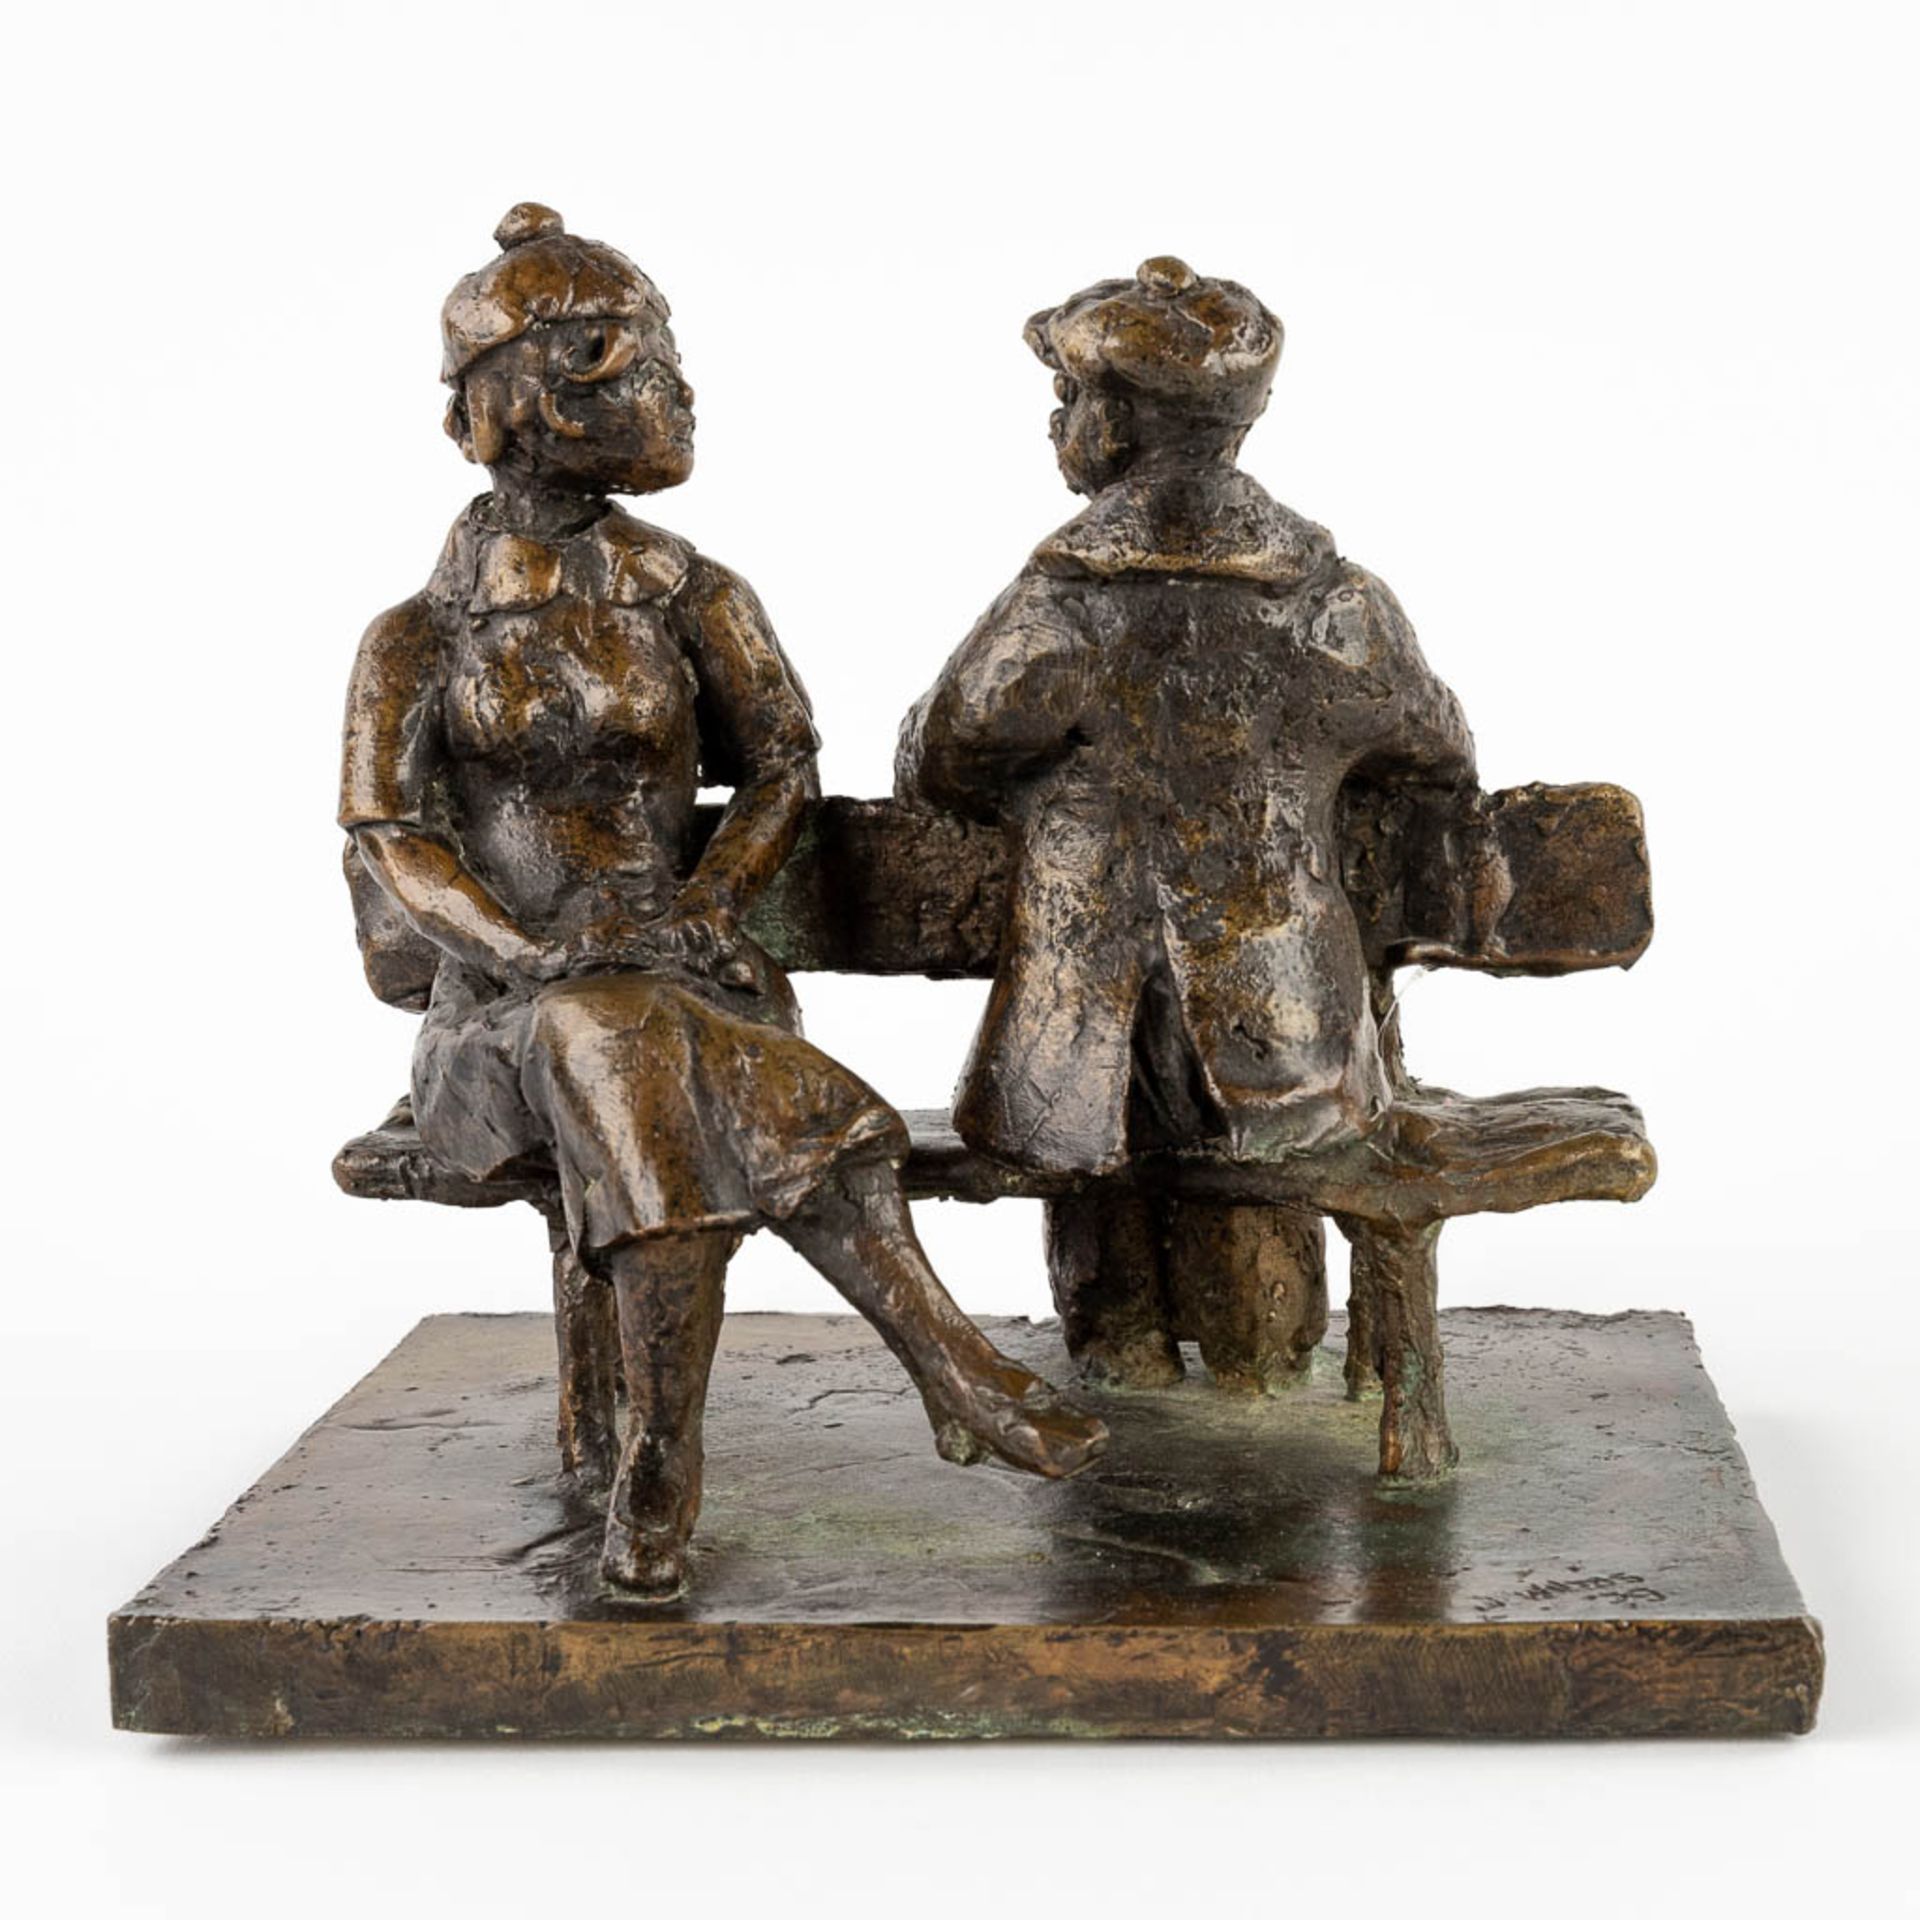 Jos WILMS (1930) 'The Bench' patinated bronze. (19)79. (D:18 x W:22 x H:20 cm) - Image 3 of 14